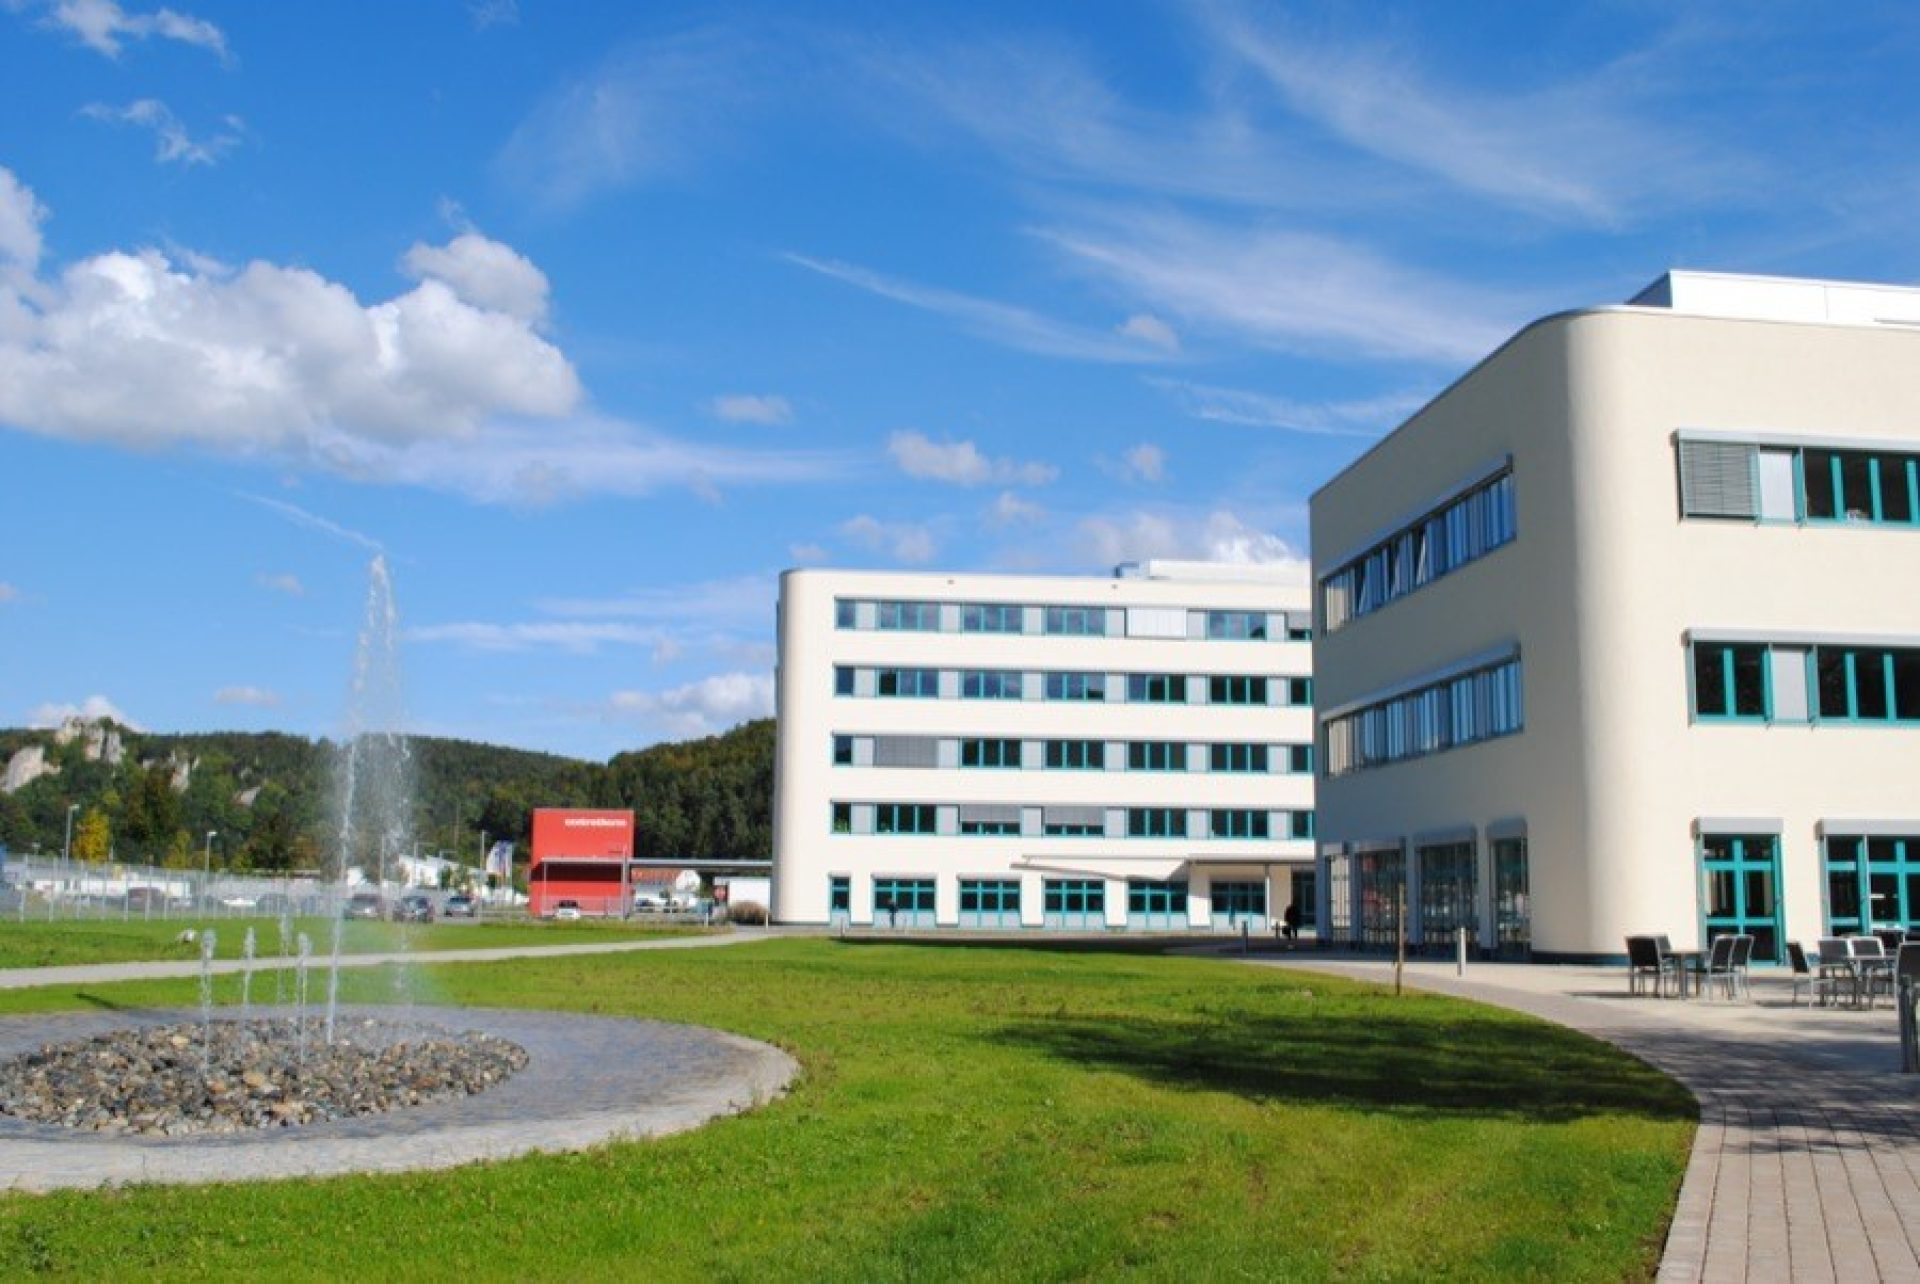 Centrotherm factory expansion - Office and Production Complex PV industry1177